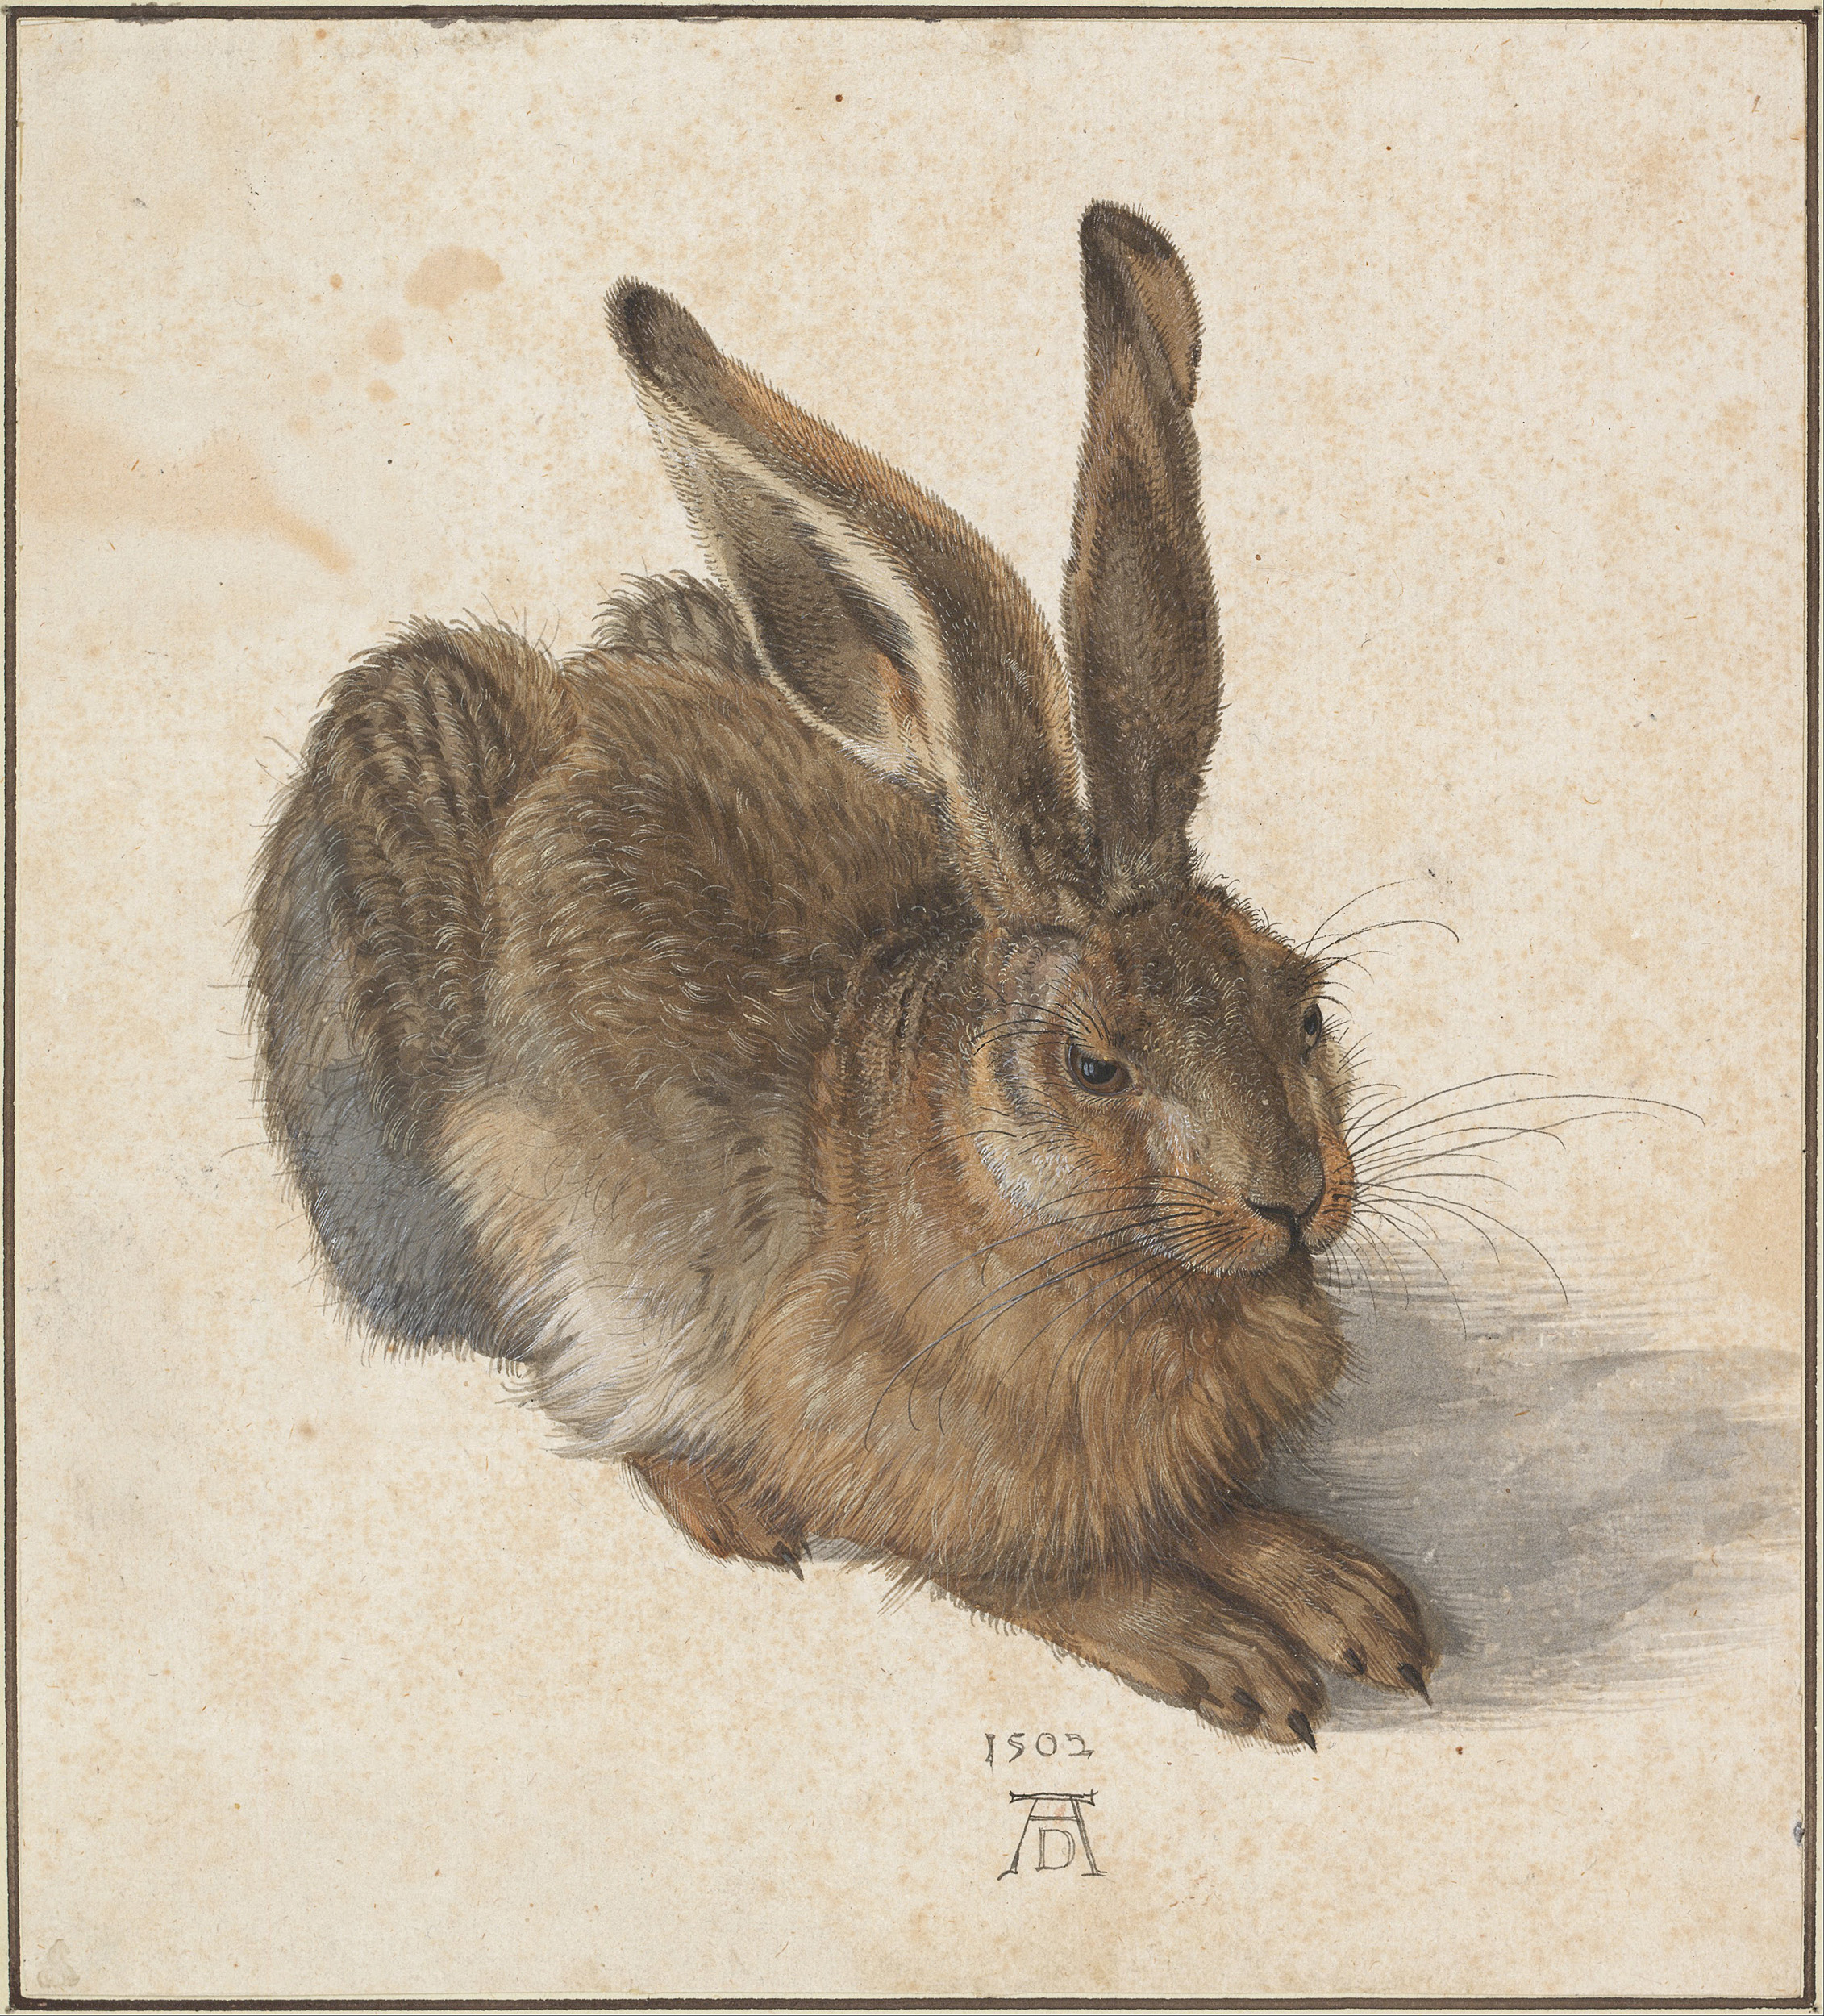 Beautiful painting of a hare by Durer